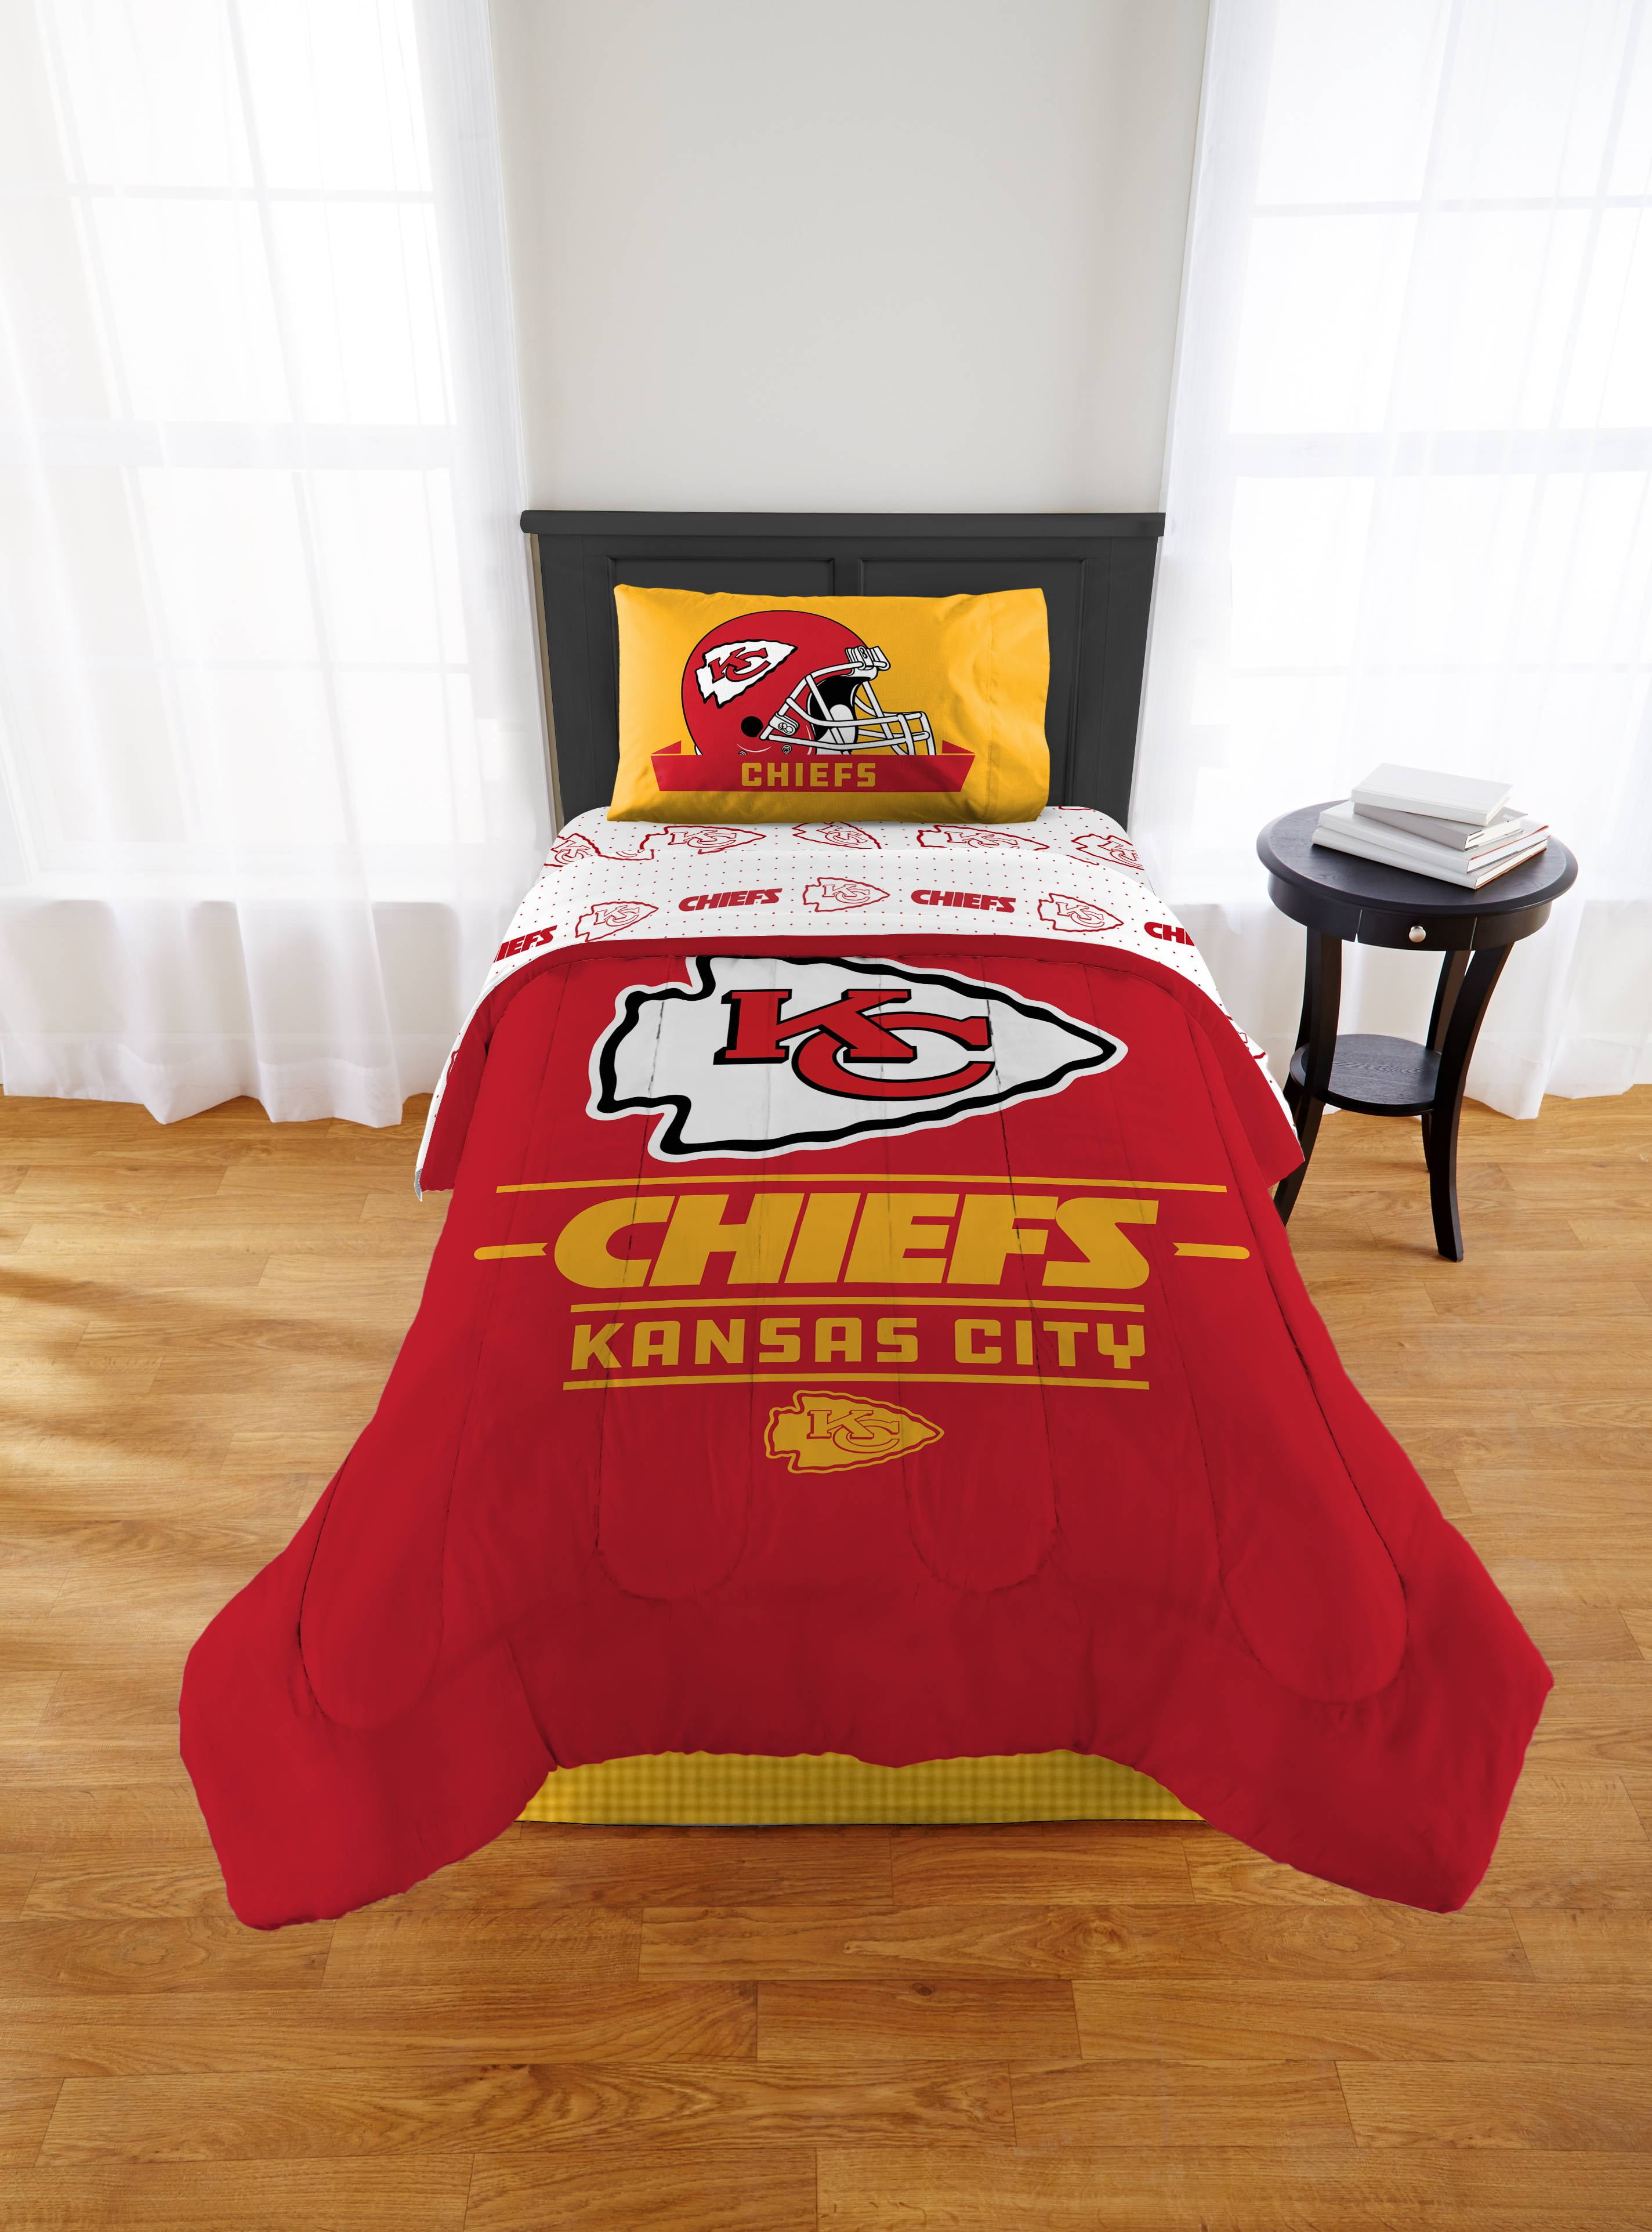 Details about   Kansas City Chiefs Football Bed Fitted Sheet Cover 3PC Fitted Sheet & Pillowcase 